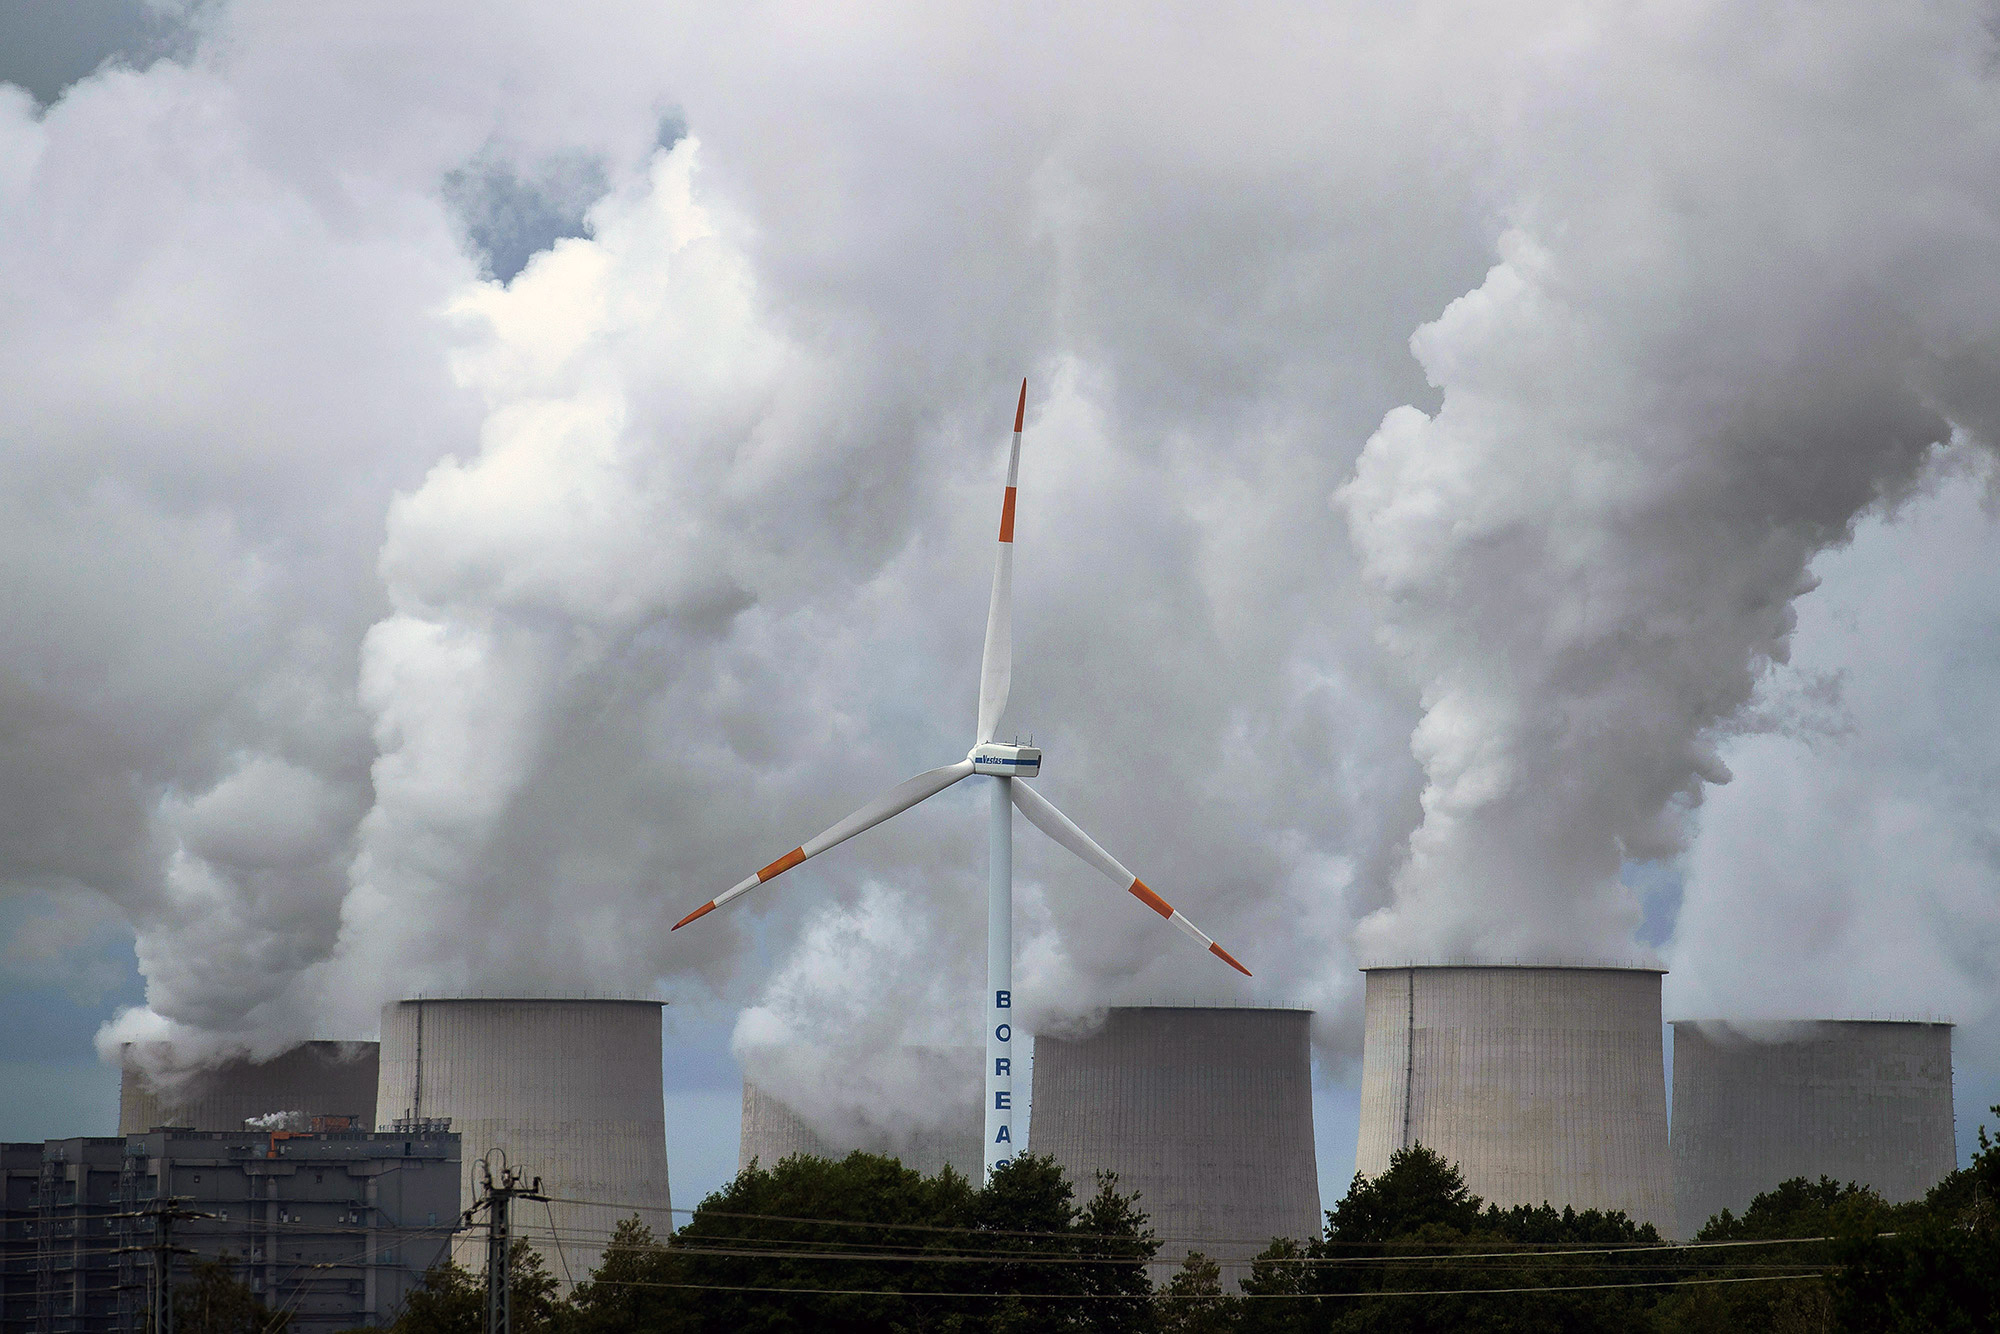 Vapour emissions rise from the Jaenschwalde lignite fired power plant in Barenbrueck, Germany.